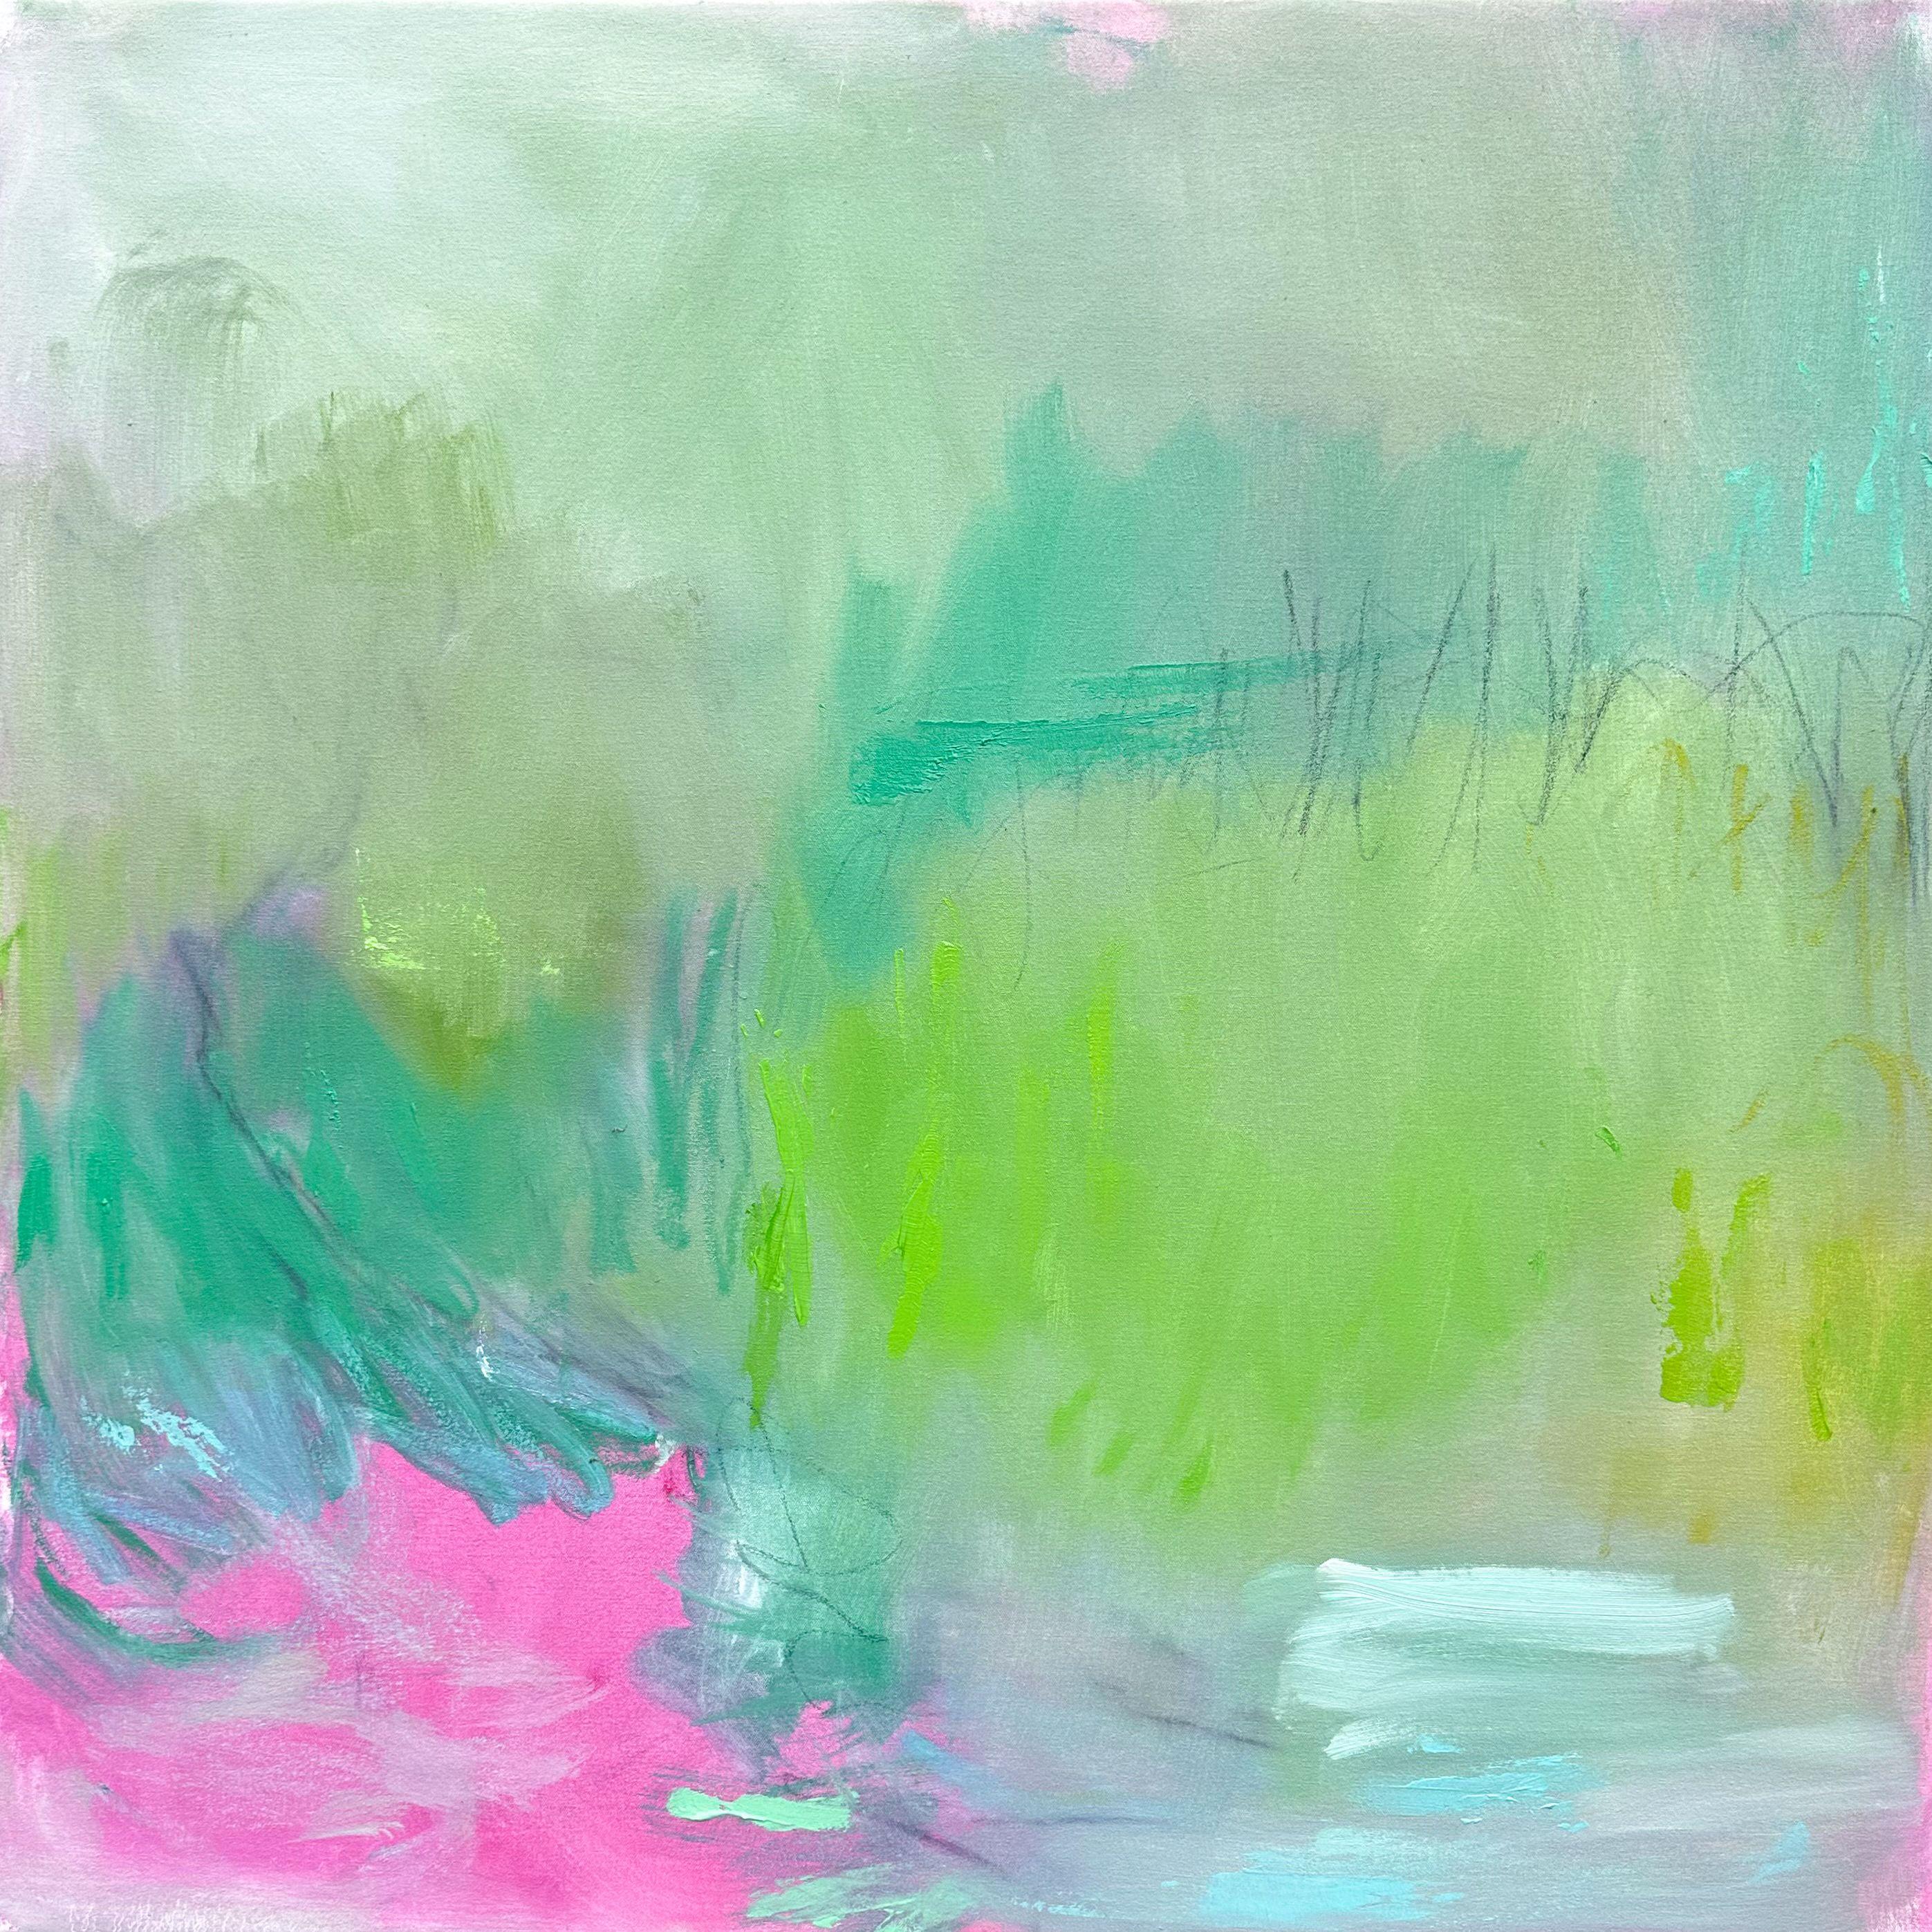 "Morning Mist" is an abstract expressionist oil painting on canvas by Trixie Pitts, a trusted artist seller. The palette is delightfully fresh and uplifting and consists of different smoky celadon green, light and bright greens, teal, chartreuse,